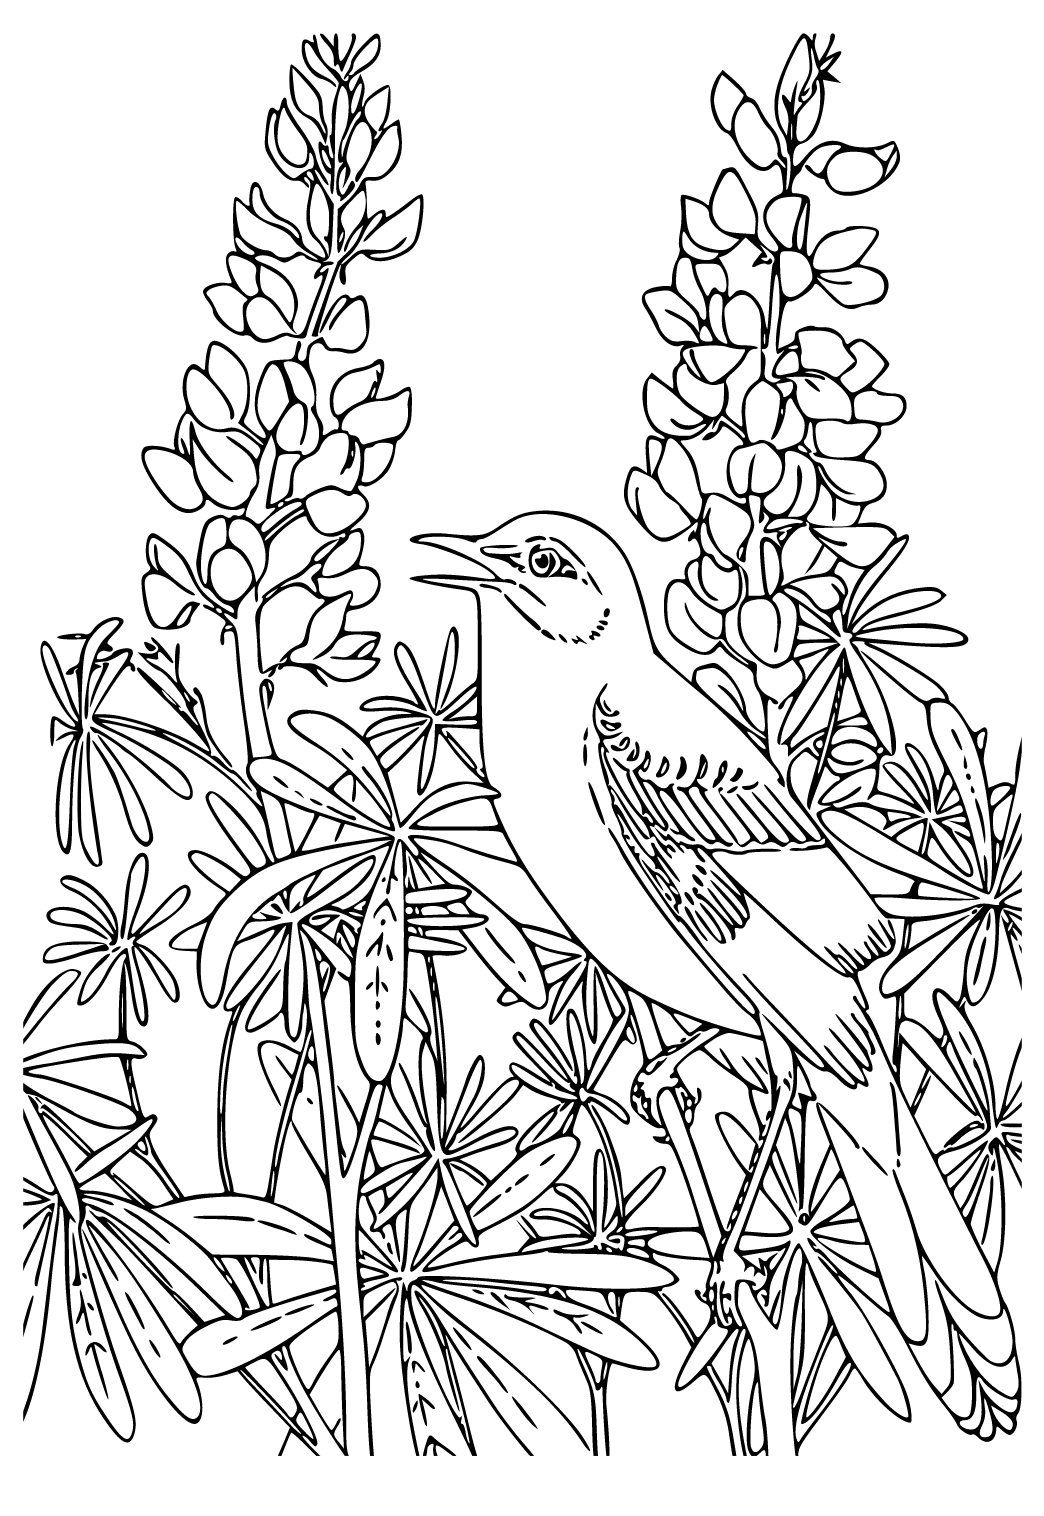 free birds coloring pages for kids